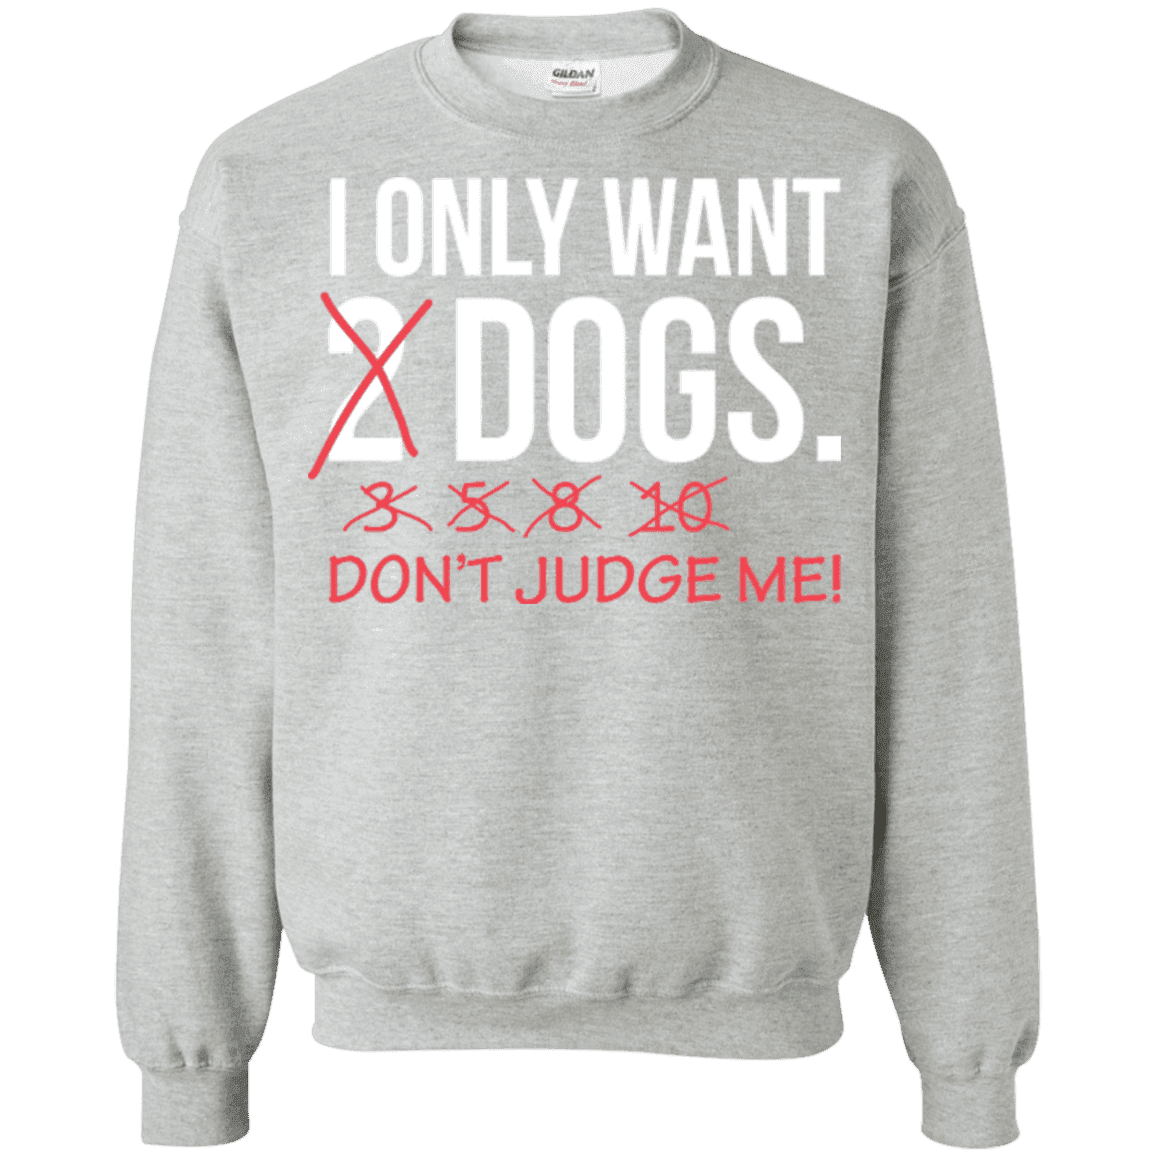 I Only Want 2 Dogs - Sweatshirt.